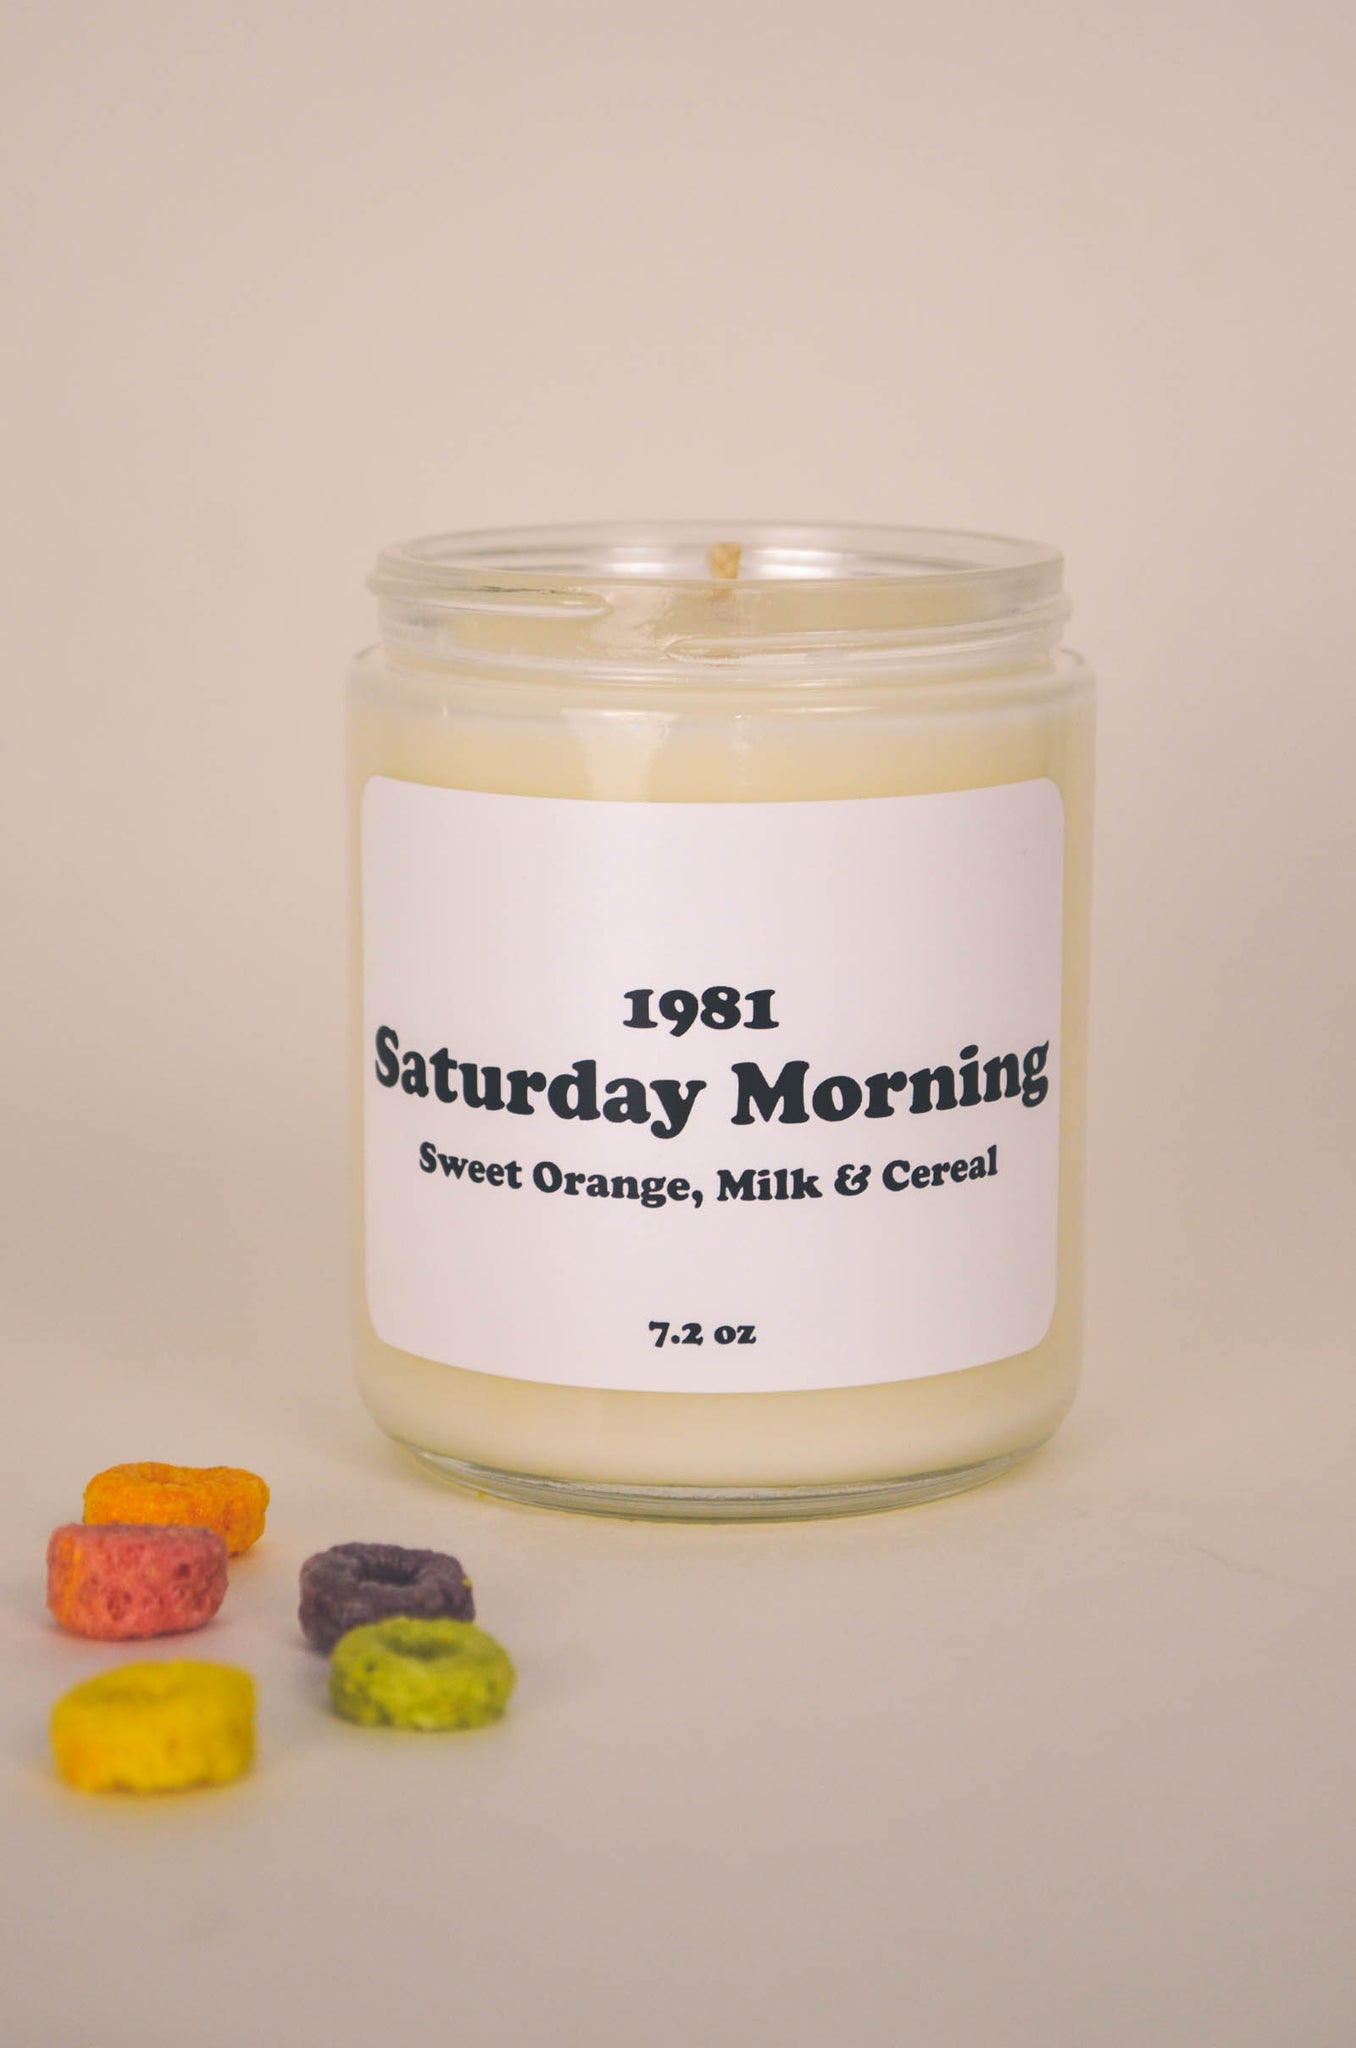 Saturday Morning Scented Soy Candle 7.2 oz